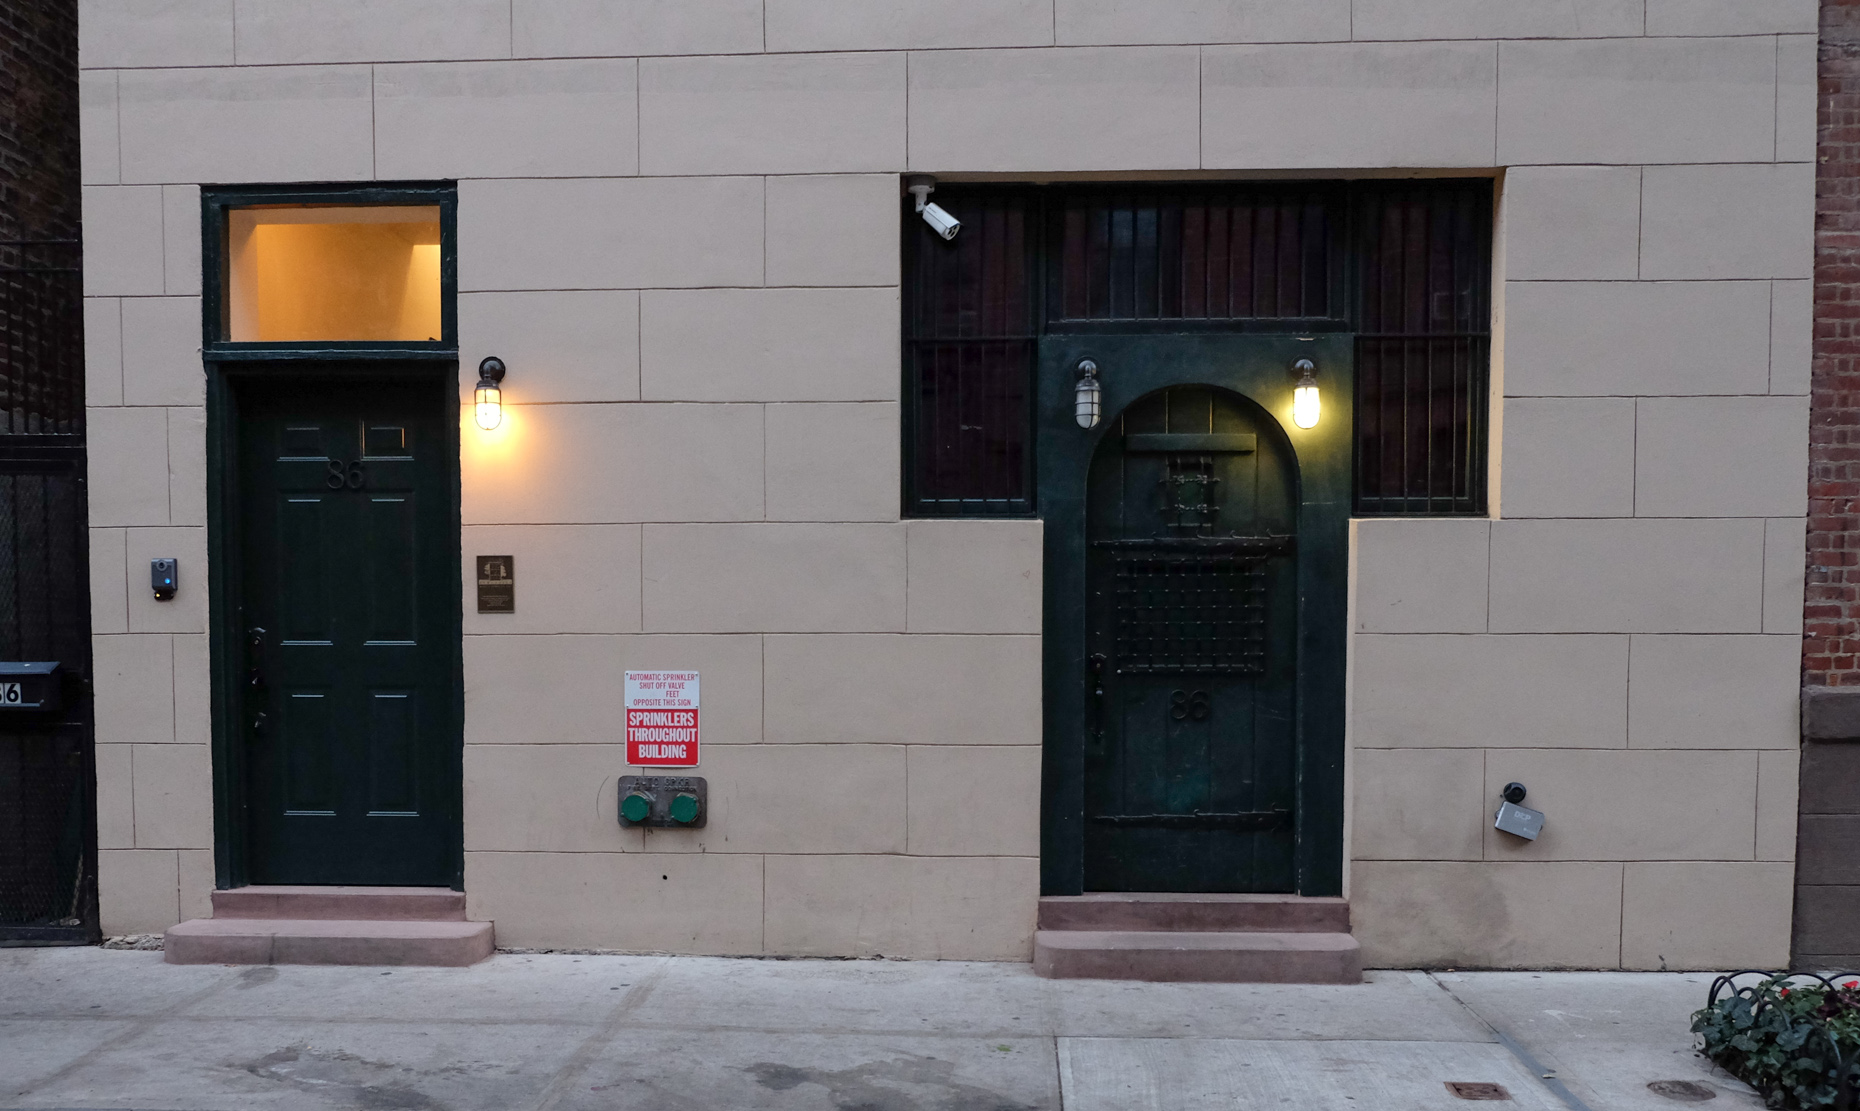 Just as it was famously before, Chumley's door is still unmarked by a sign.